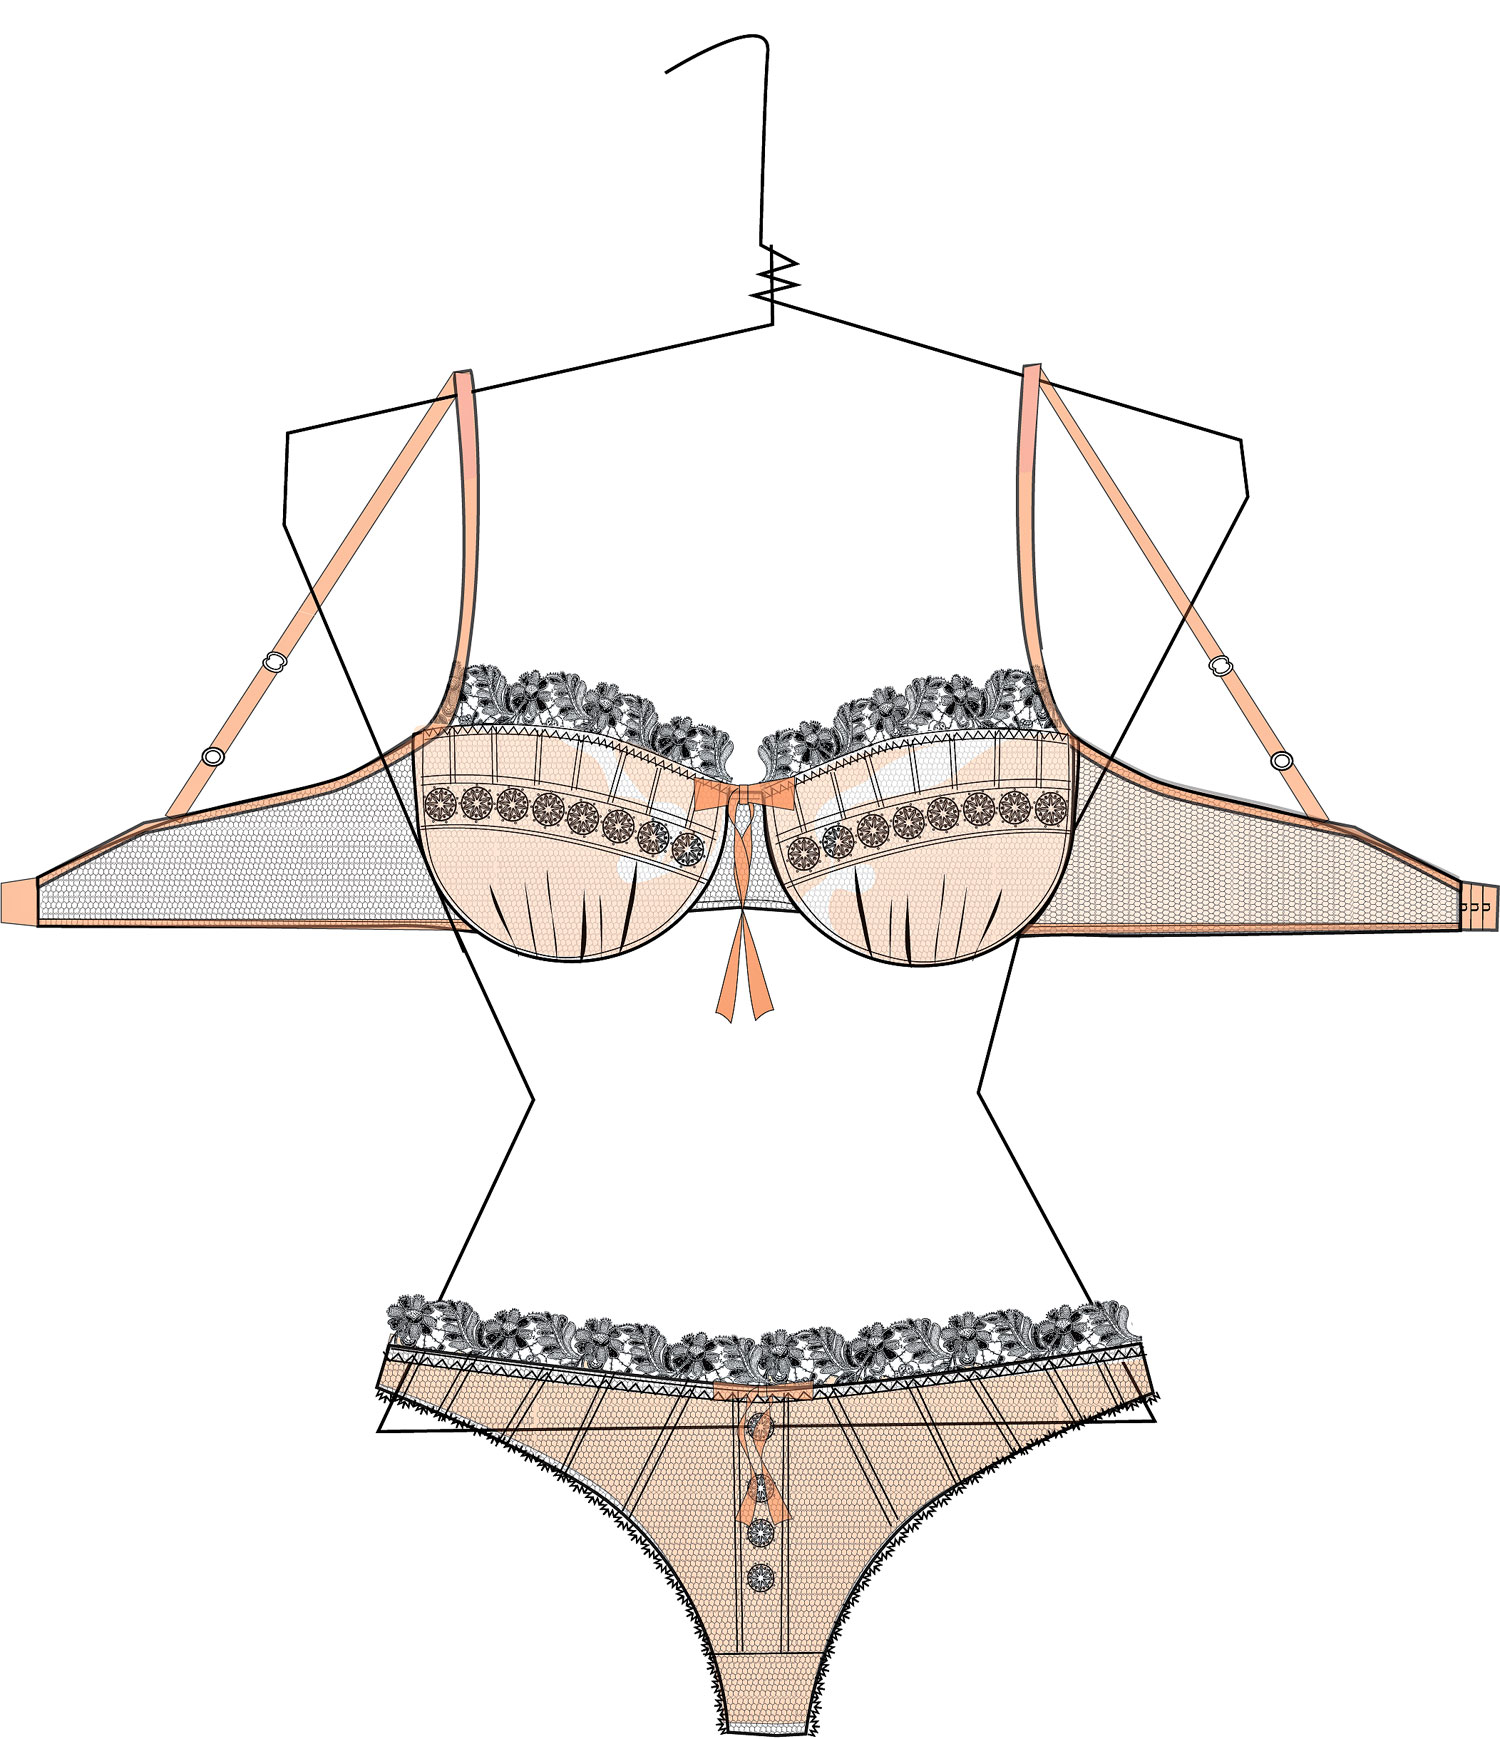 Stylelines created by CHIARIstyle for 2022 illustrative lingerie trends ...